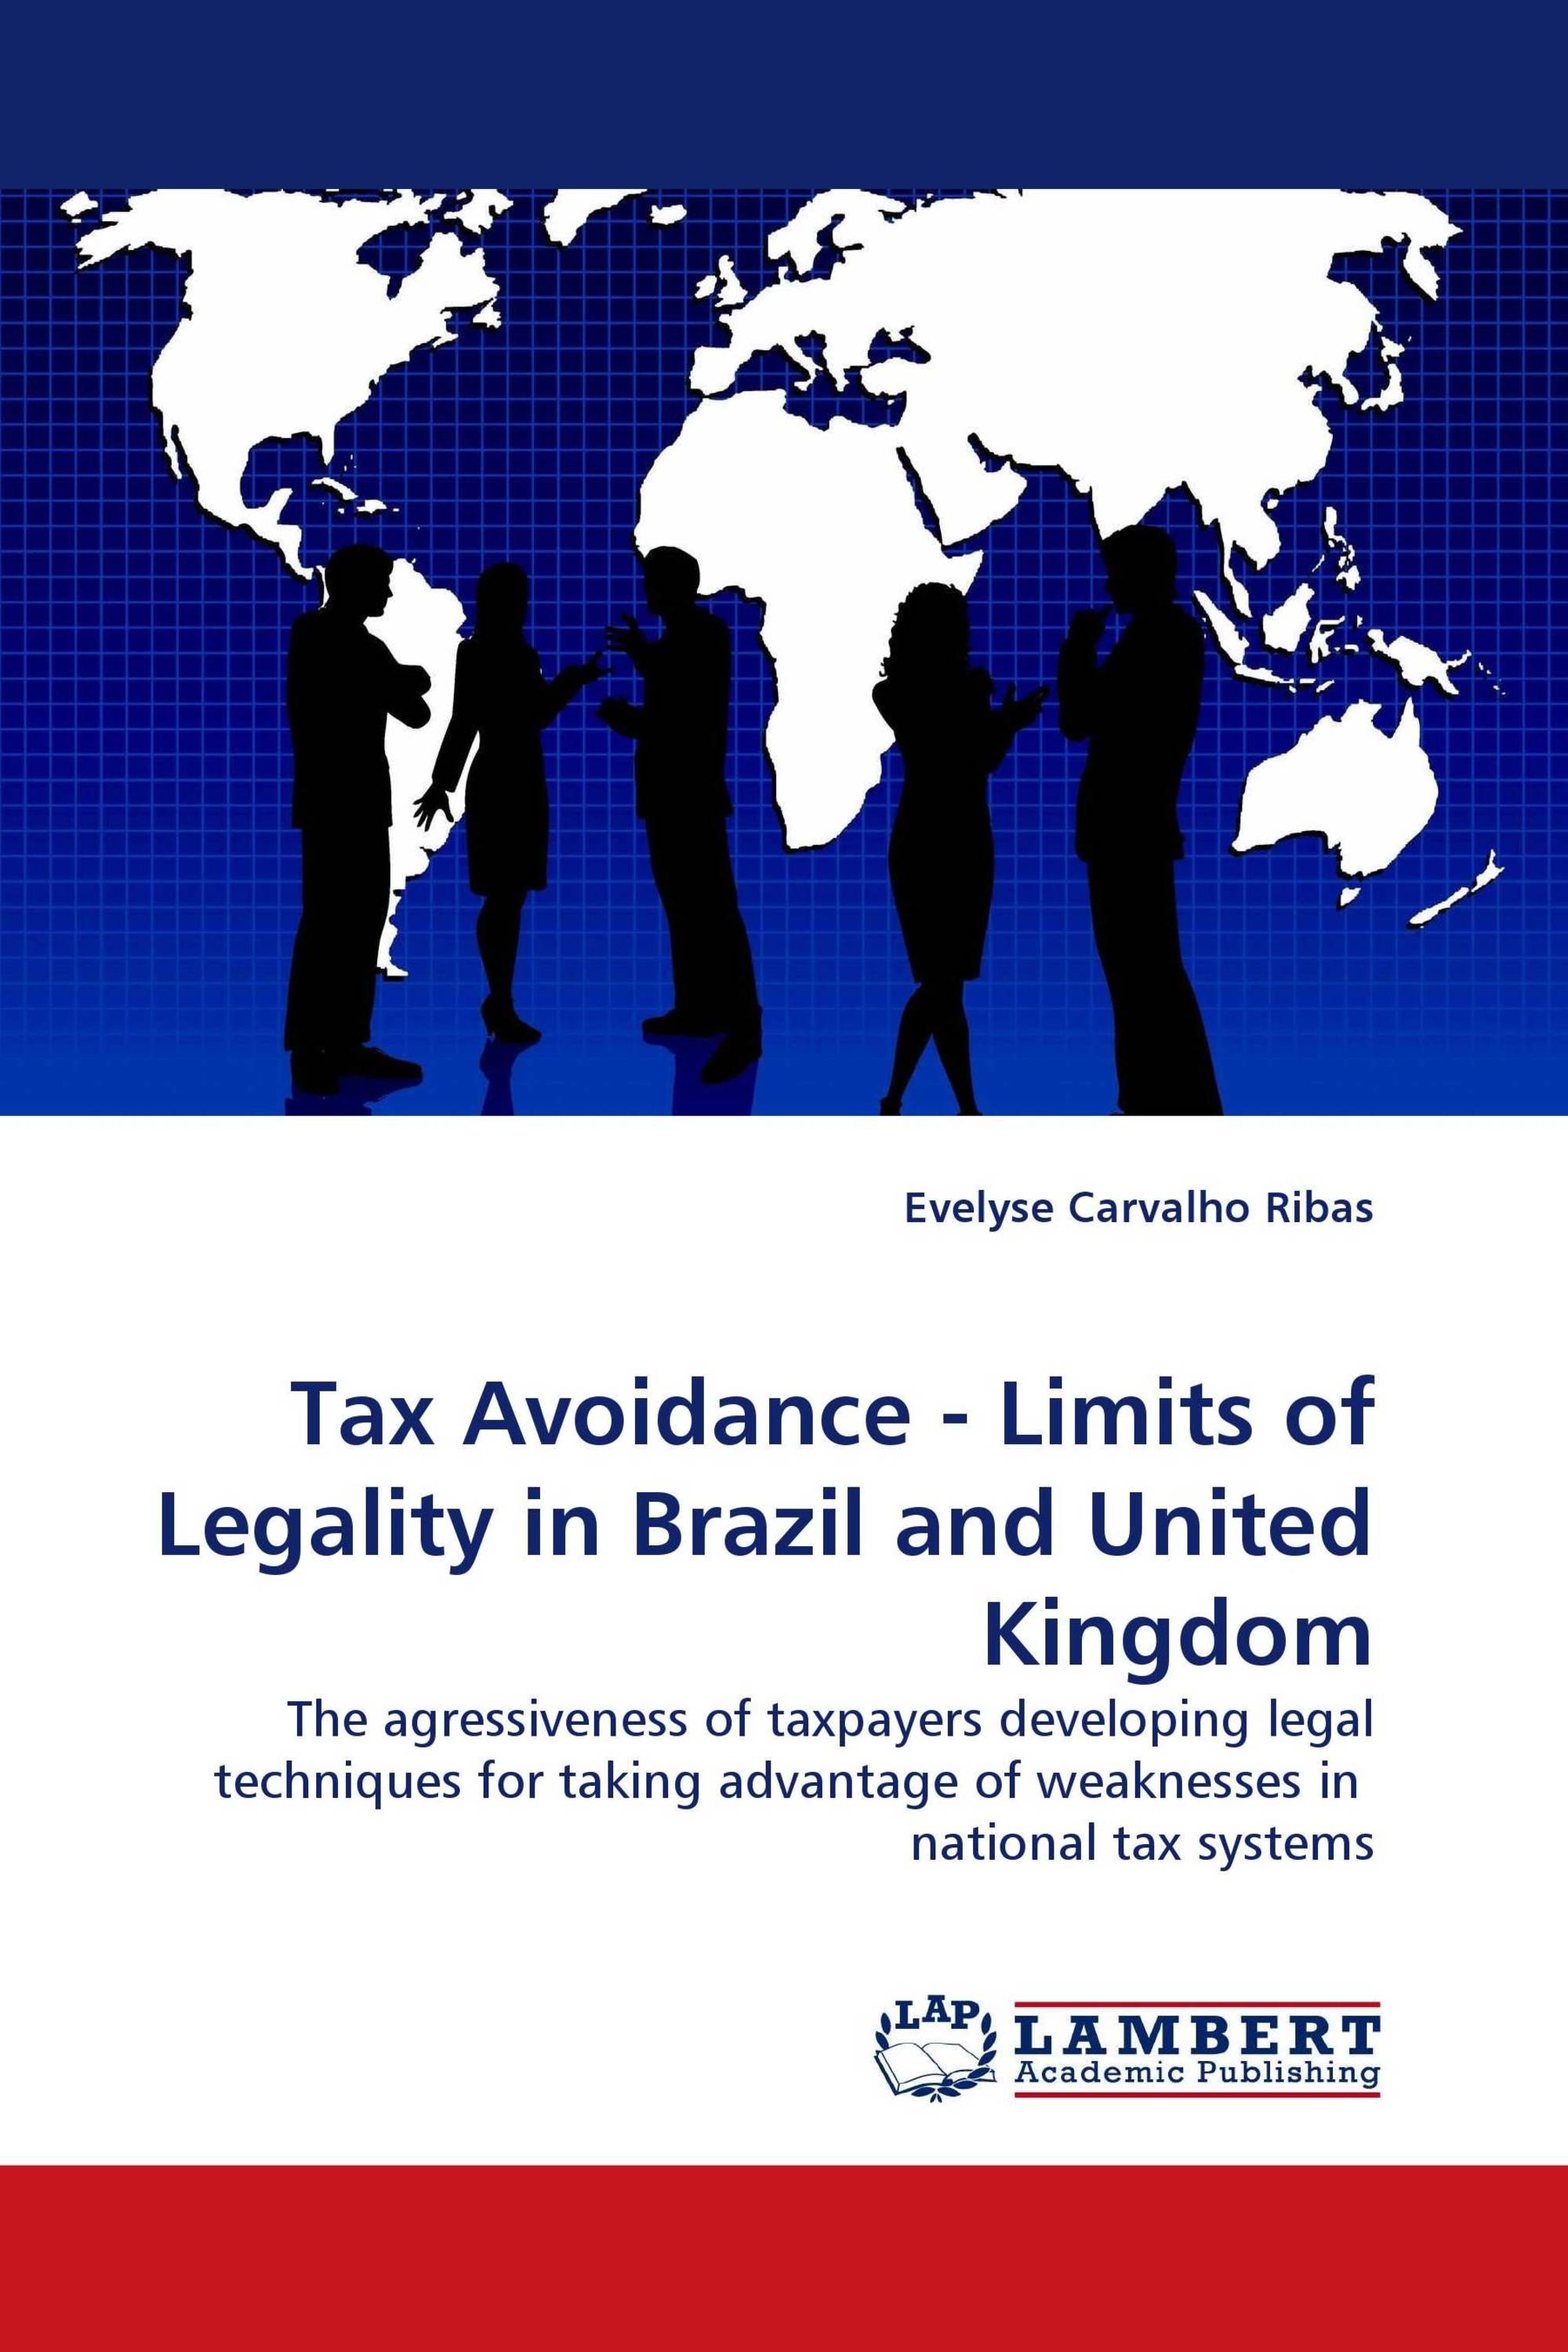 Tax Avoidance - Limits of Legality in Brazil and United Kingdom